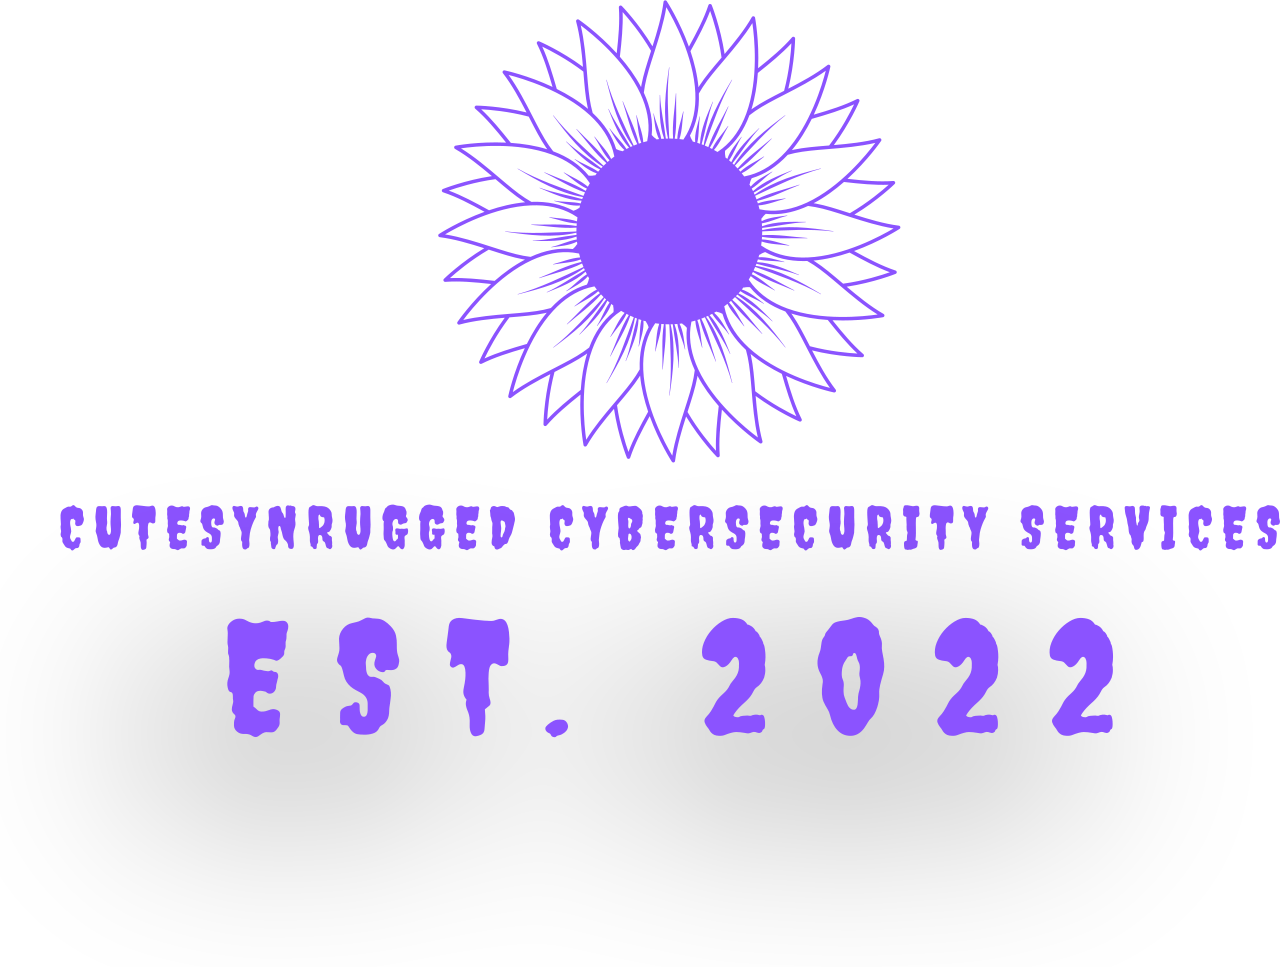 CutesyNRugged Cybersecurity Services's logo